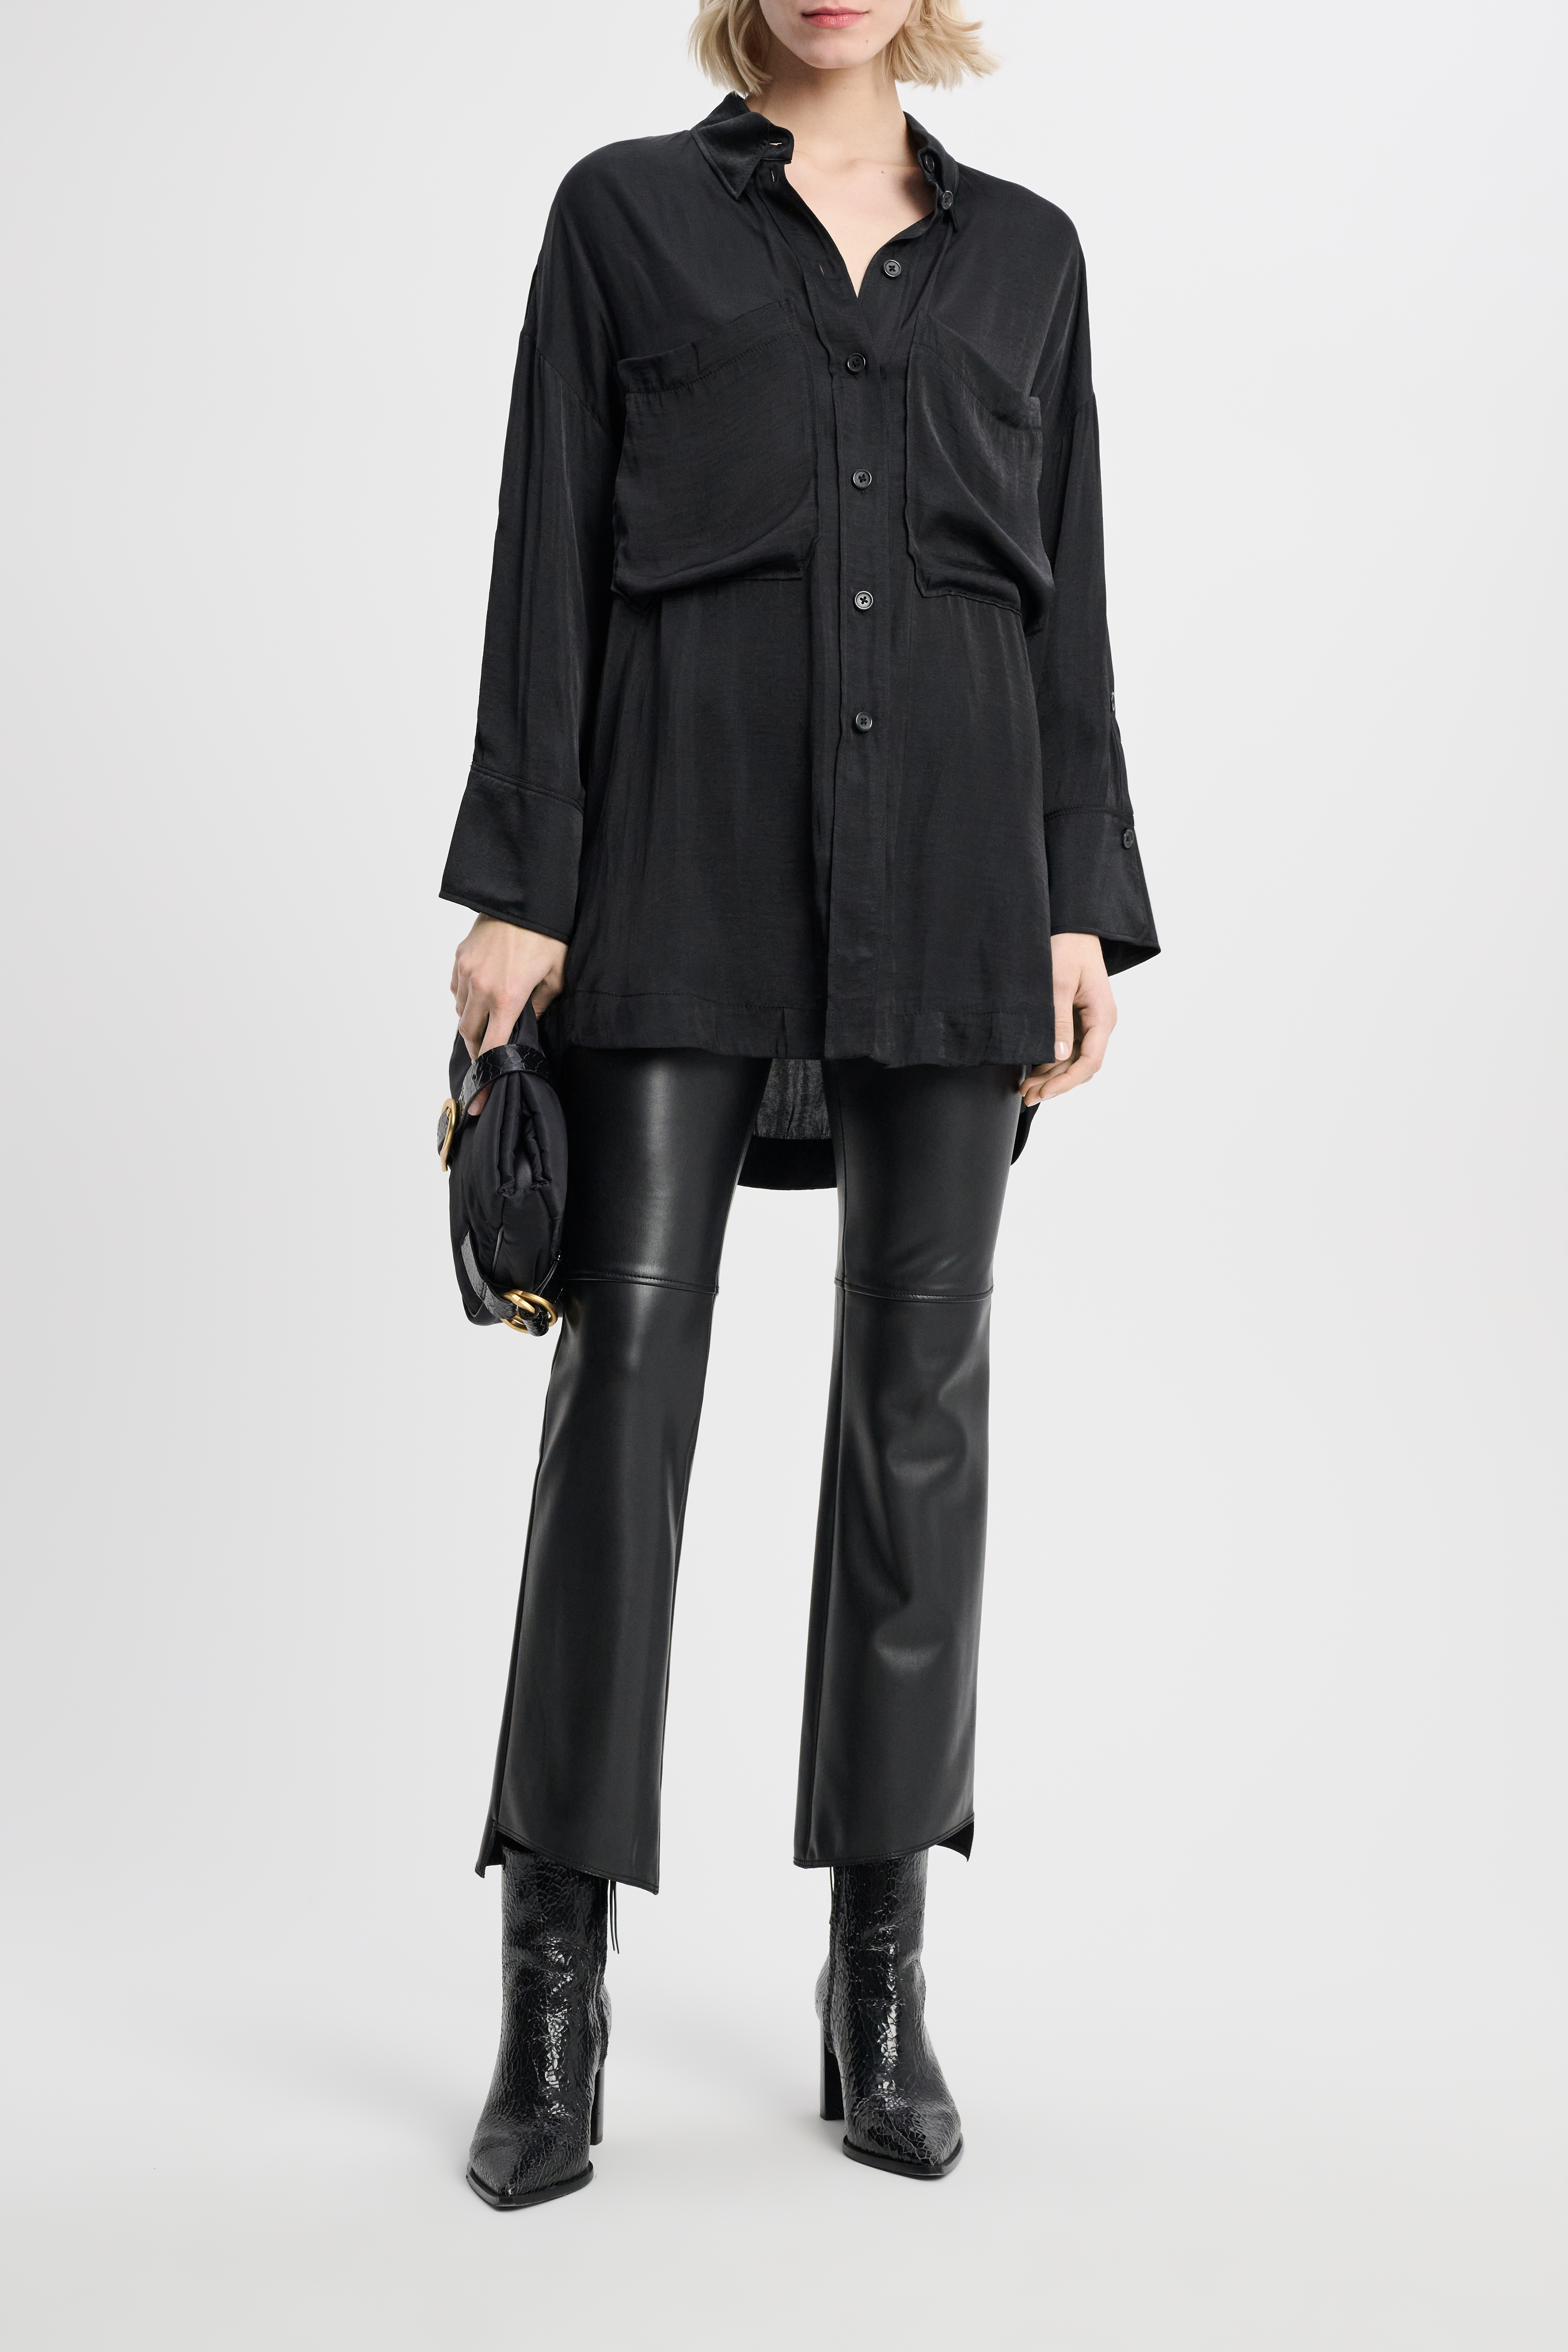 Dorothee Schumacher Oversized shirt in crinkle satin with patch